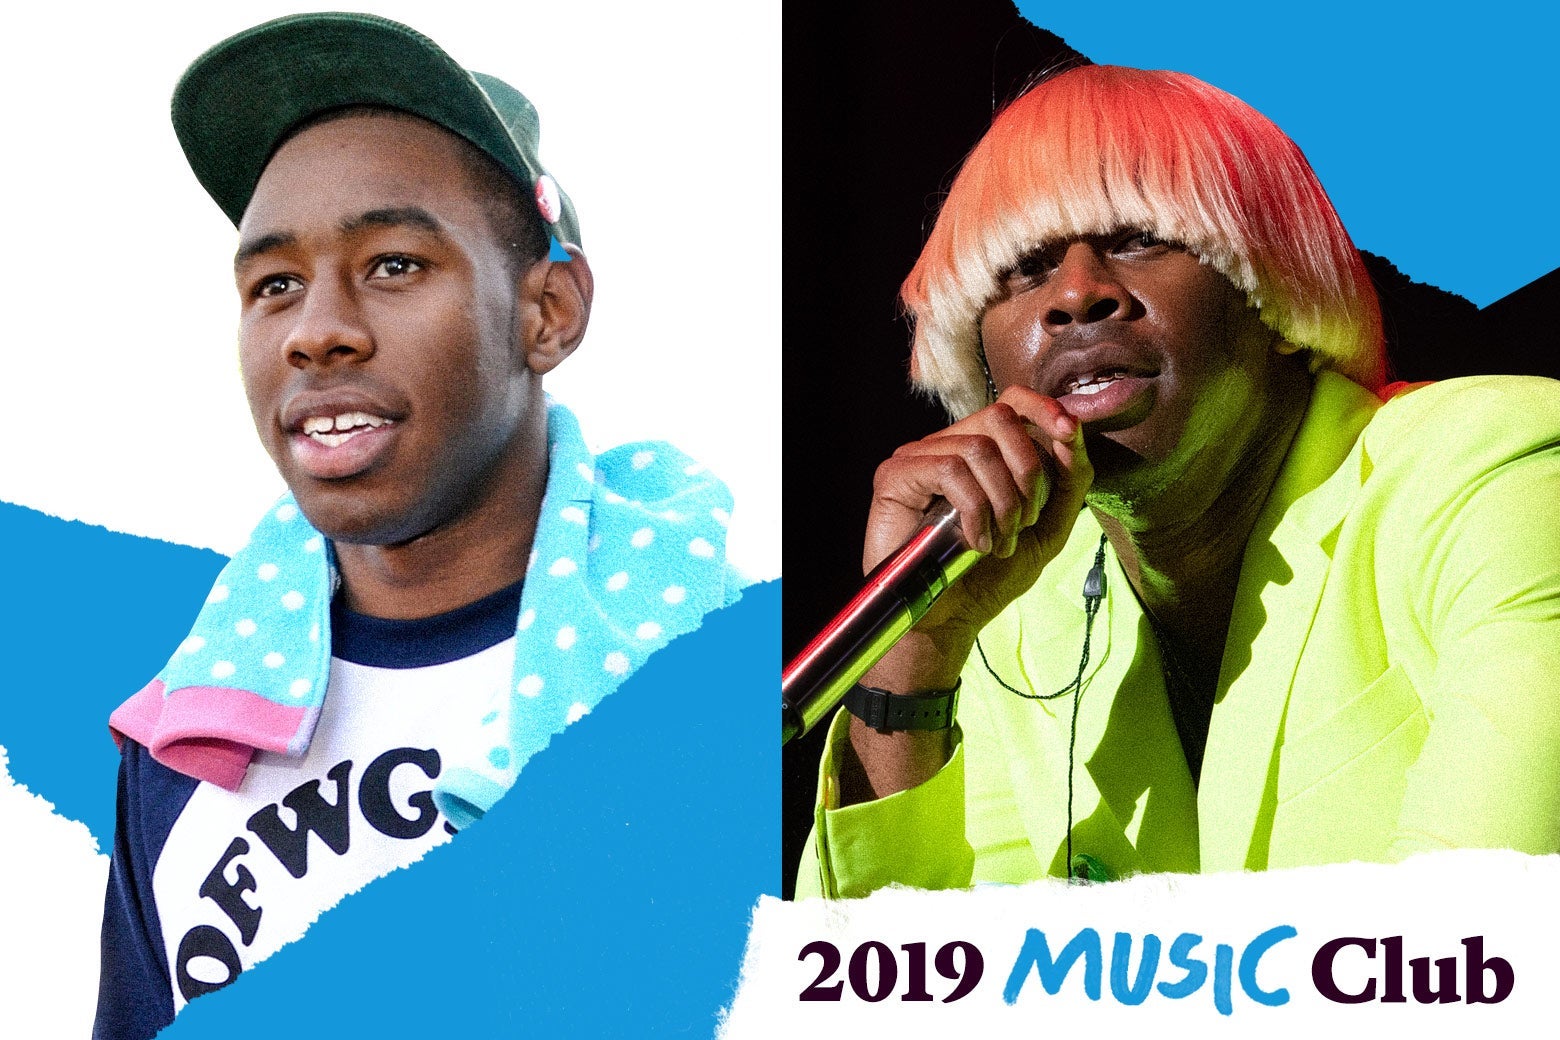 Tyler, the Creator in a OFWGKTA T-shirt, and now in a neon boxy suit and blond bowl cut wig. Text in the corner says, "2019 Music Club."